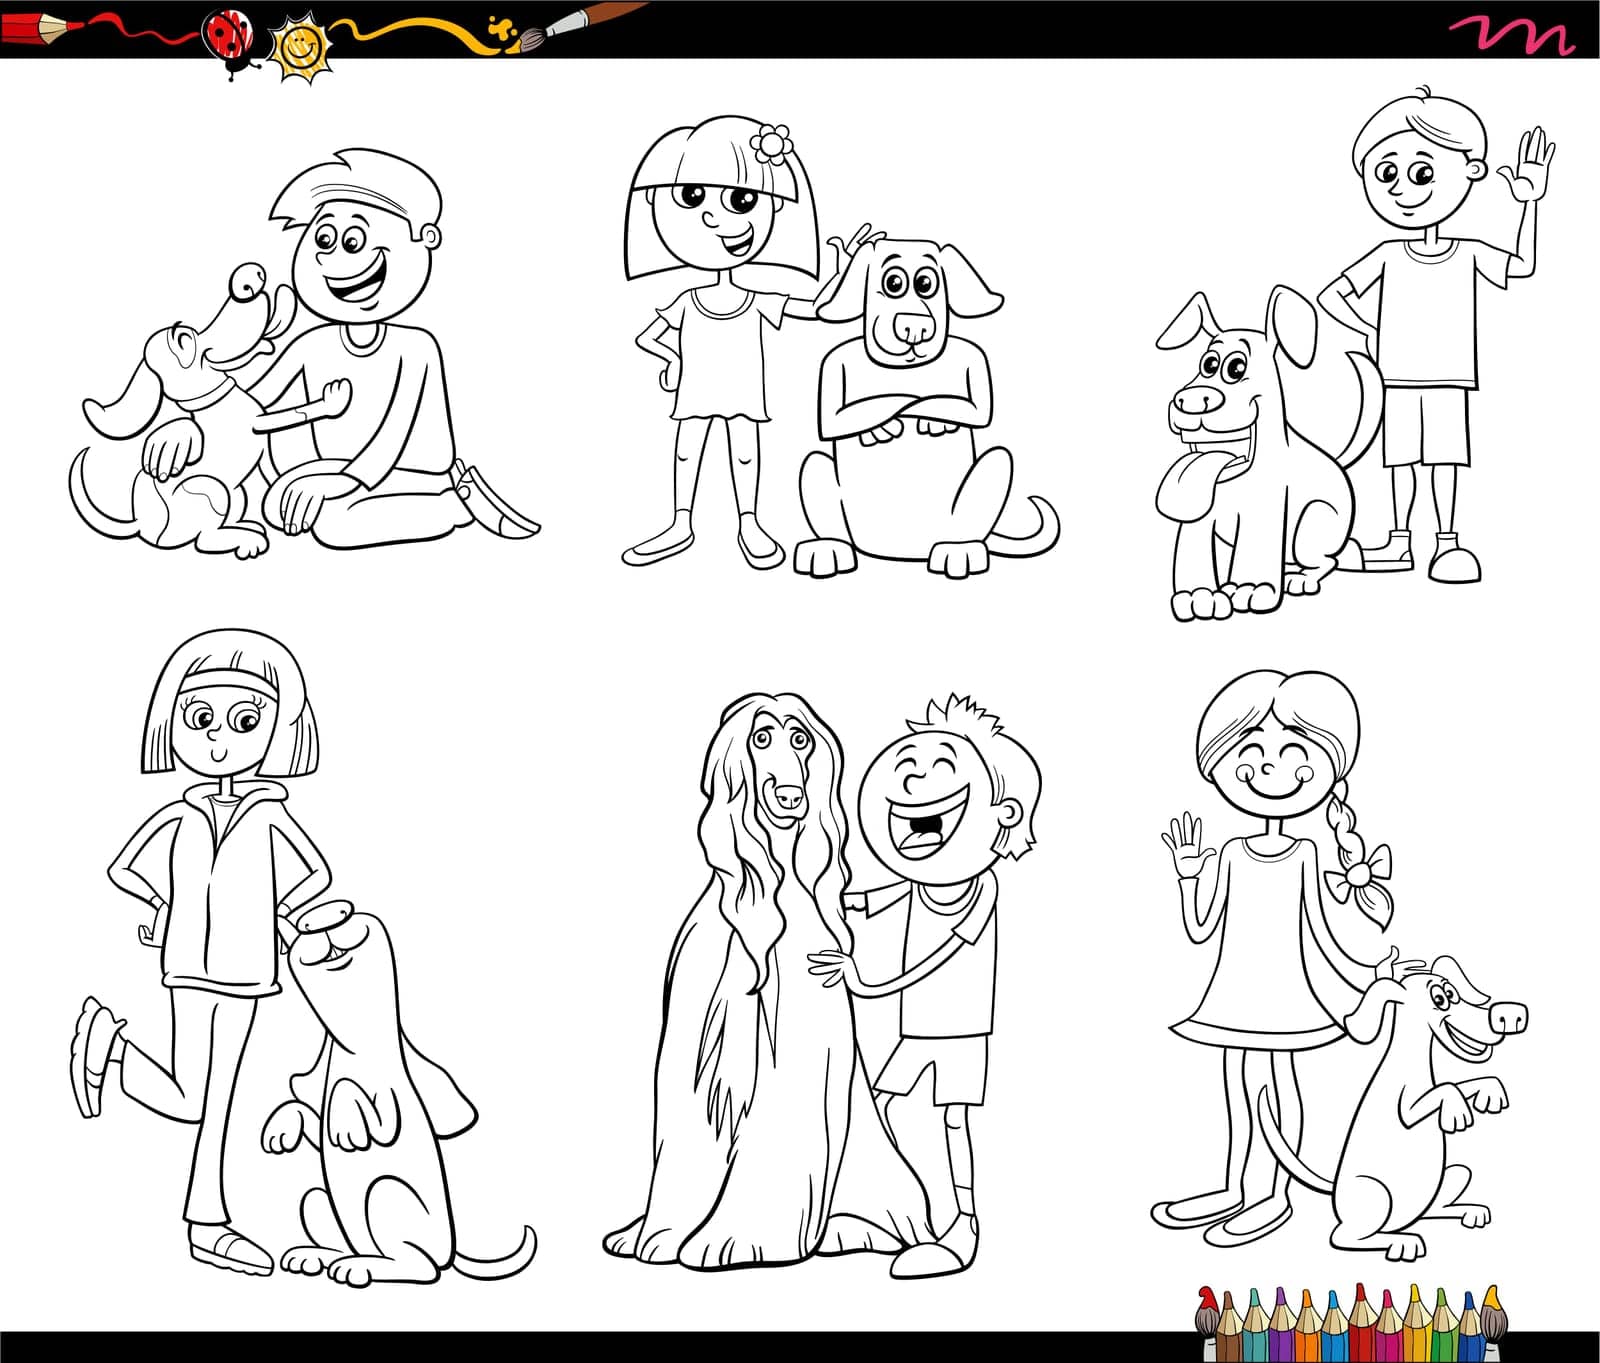 Black and white cartoon illustration of children or teens with their dogs characters set coloring page